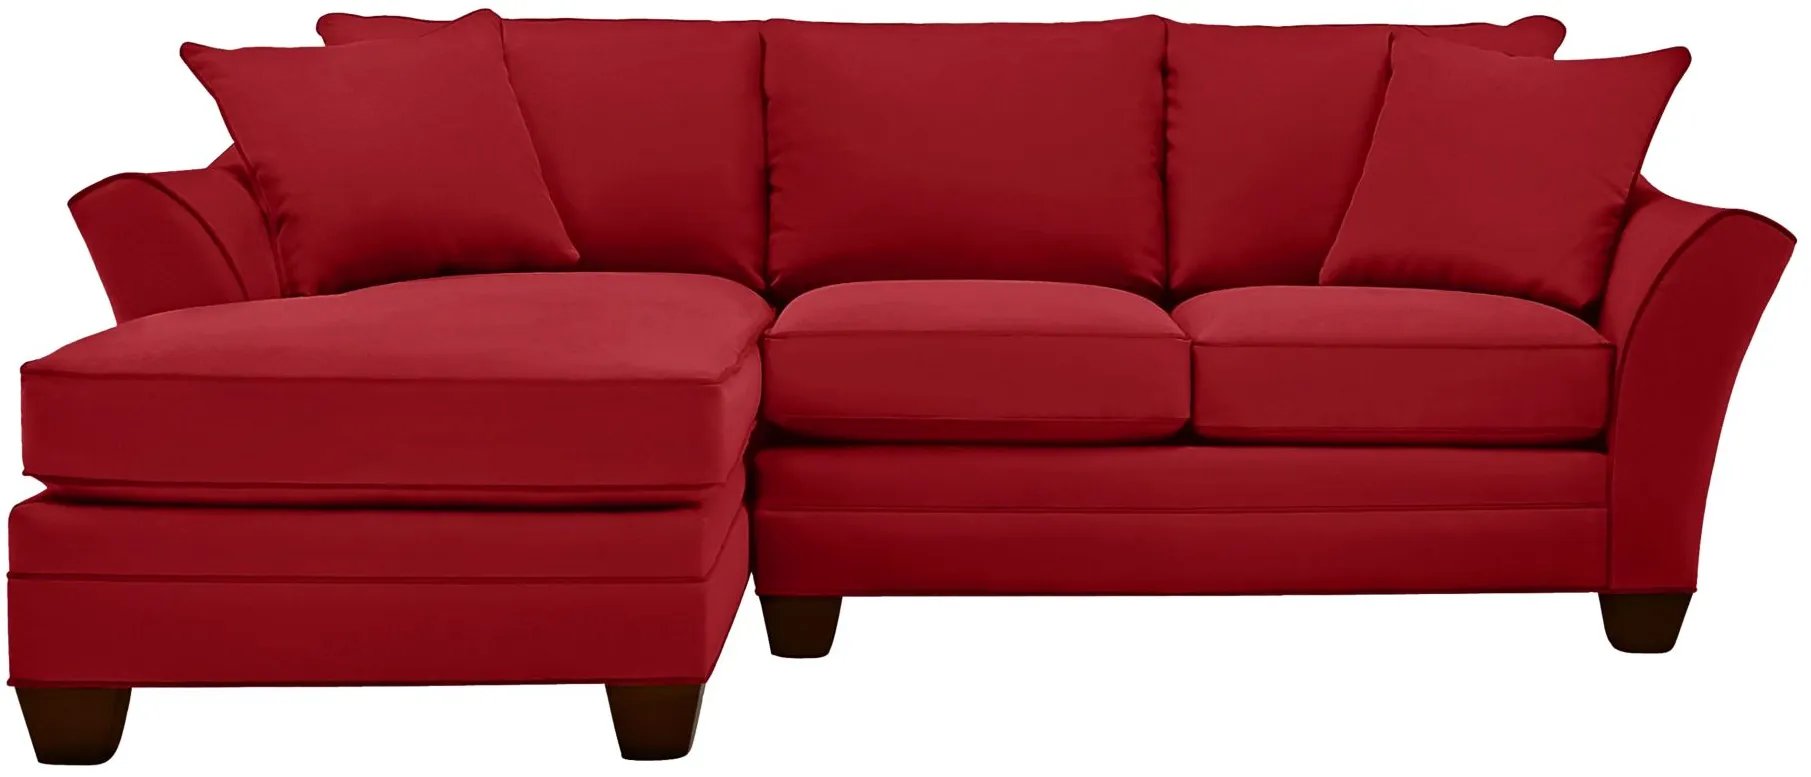 Foresthill 2-pc. Left Hand Chaise Sectional Sofa in Suede So Soft Cardinal by H.M. Richards